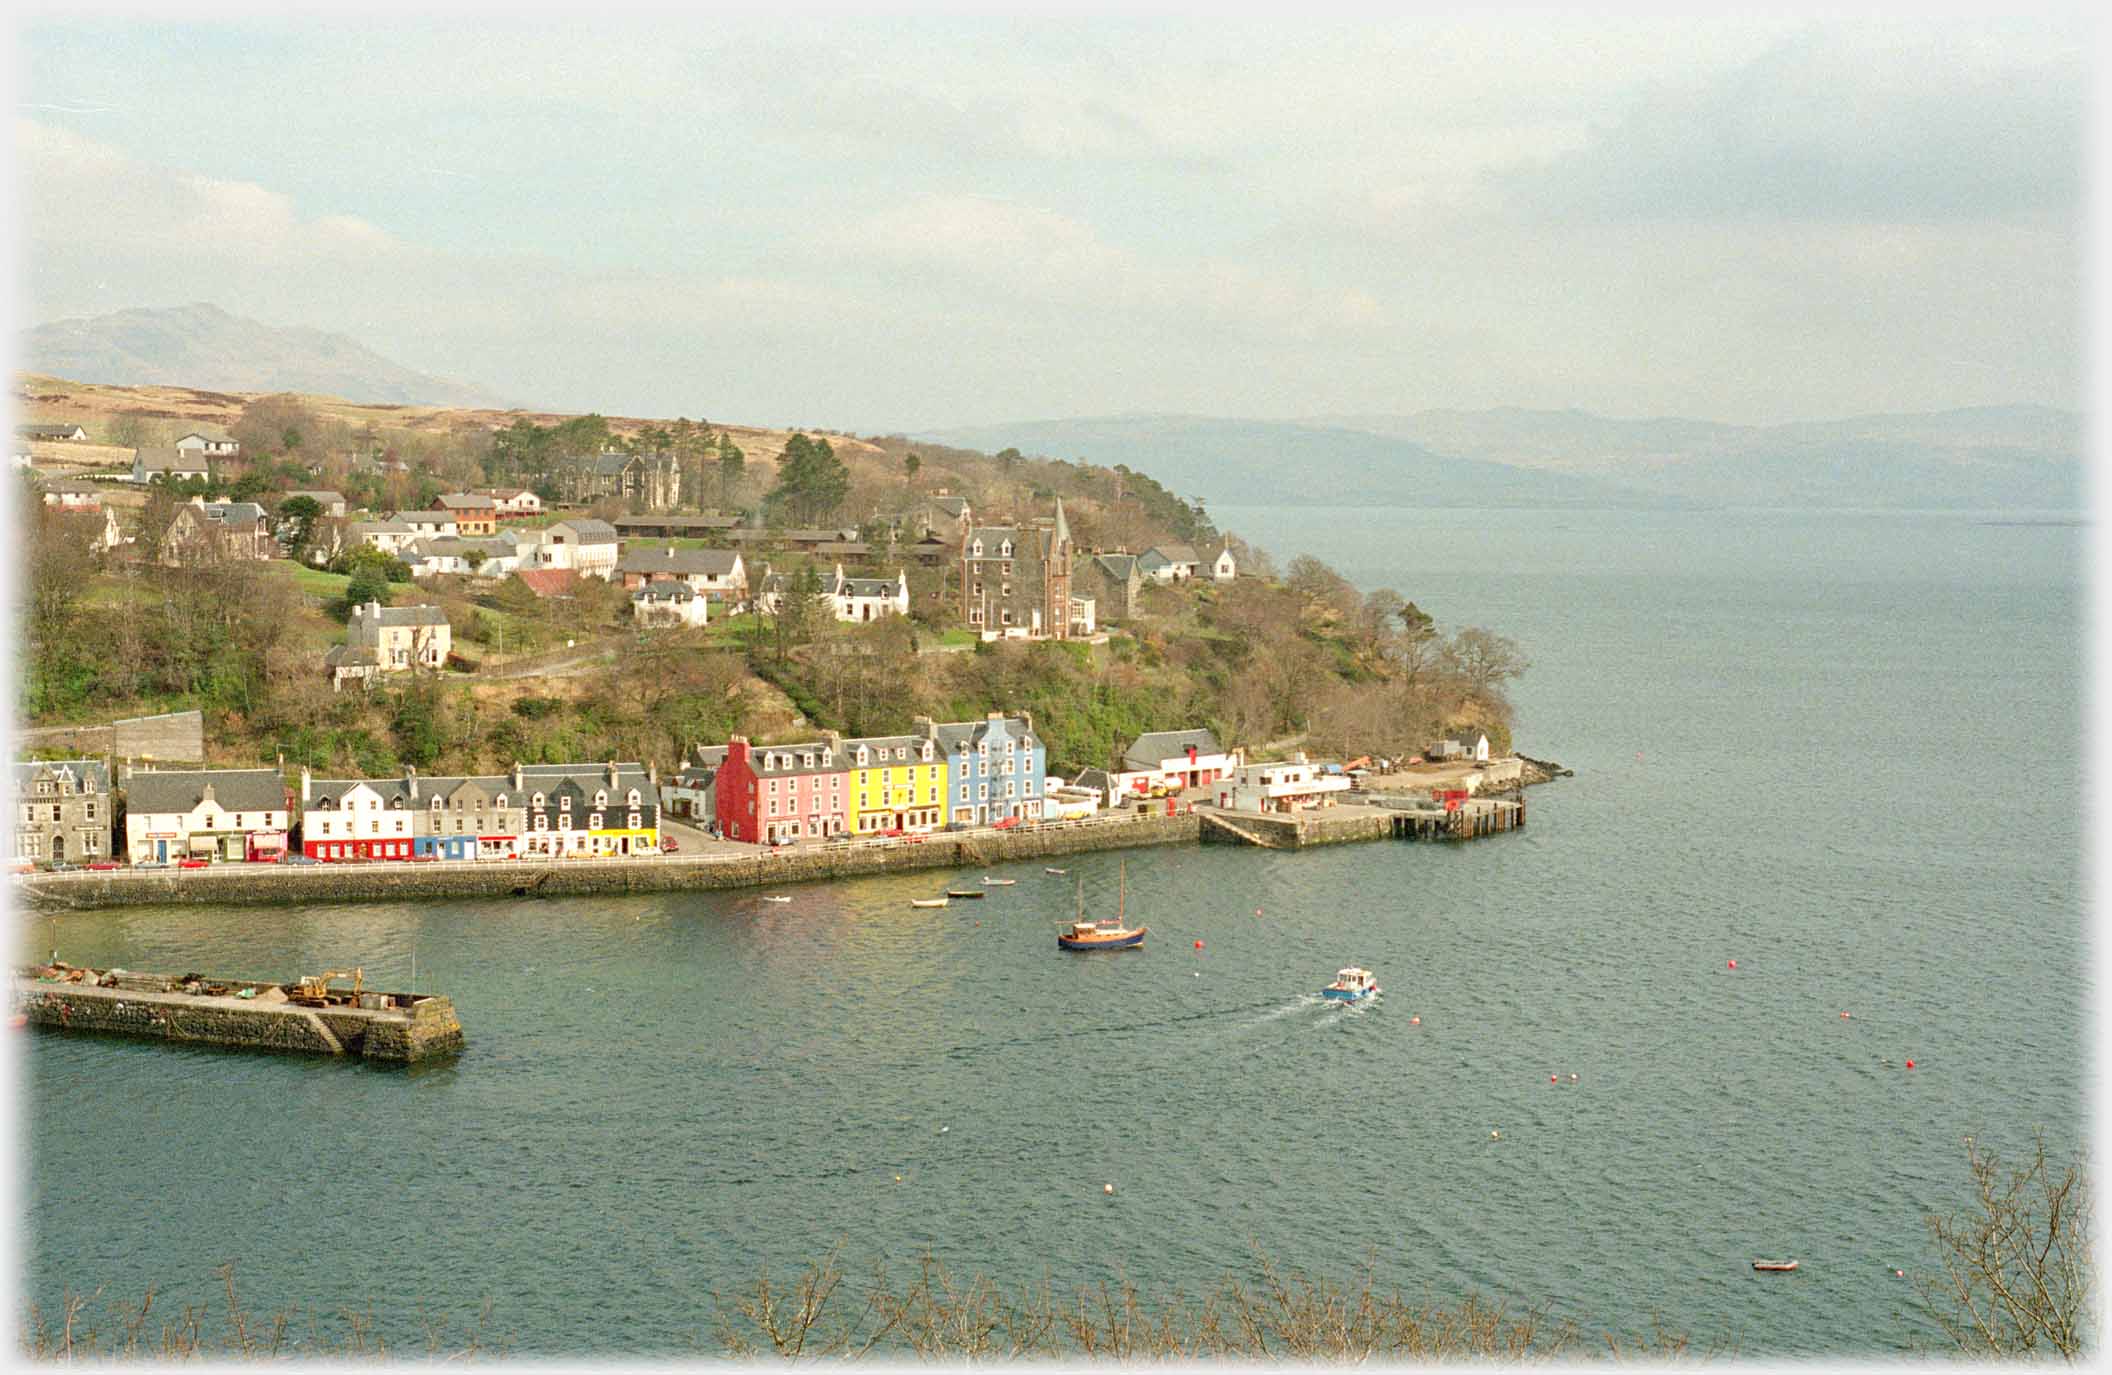 Brightly coloured houses near headland with hills across the sea.